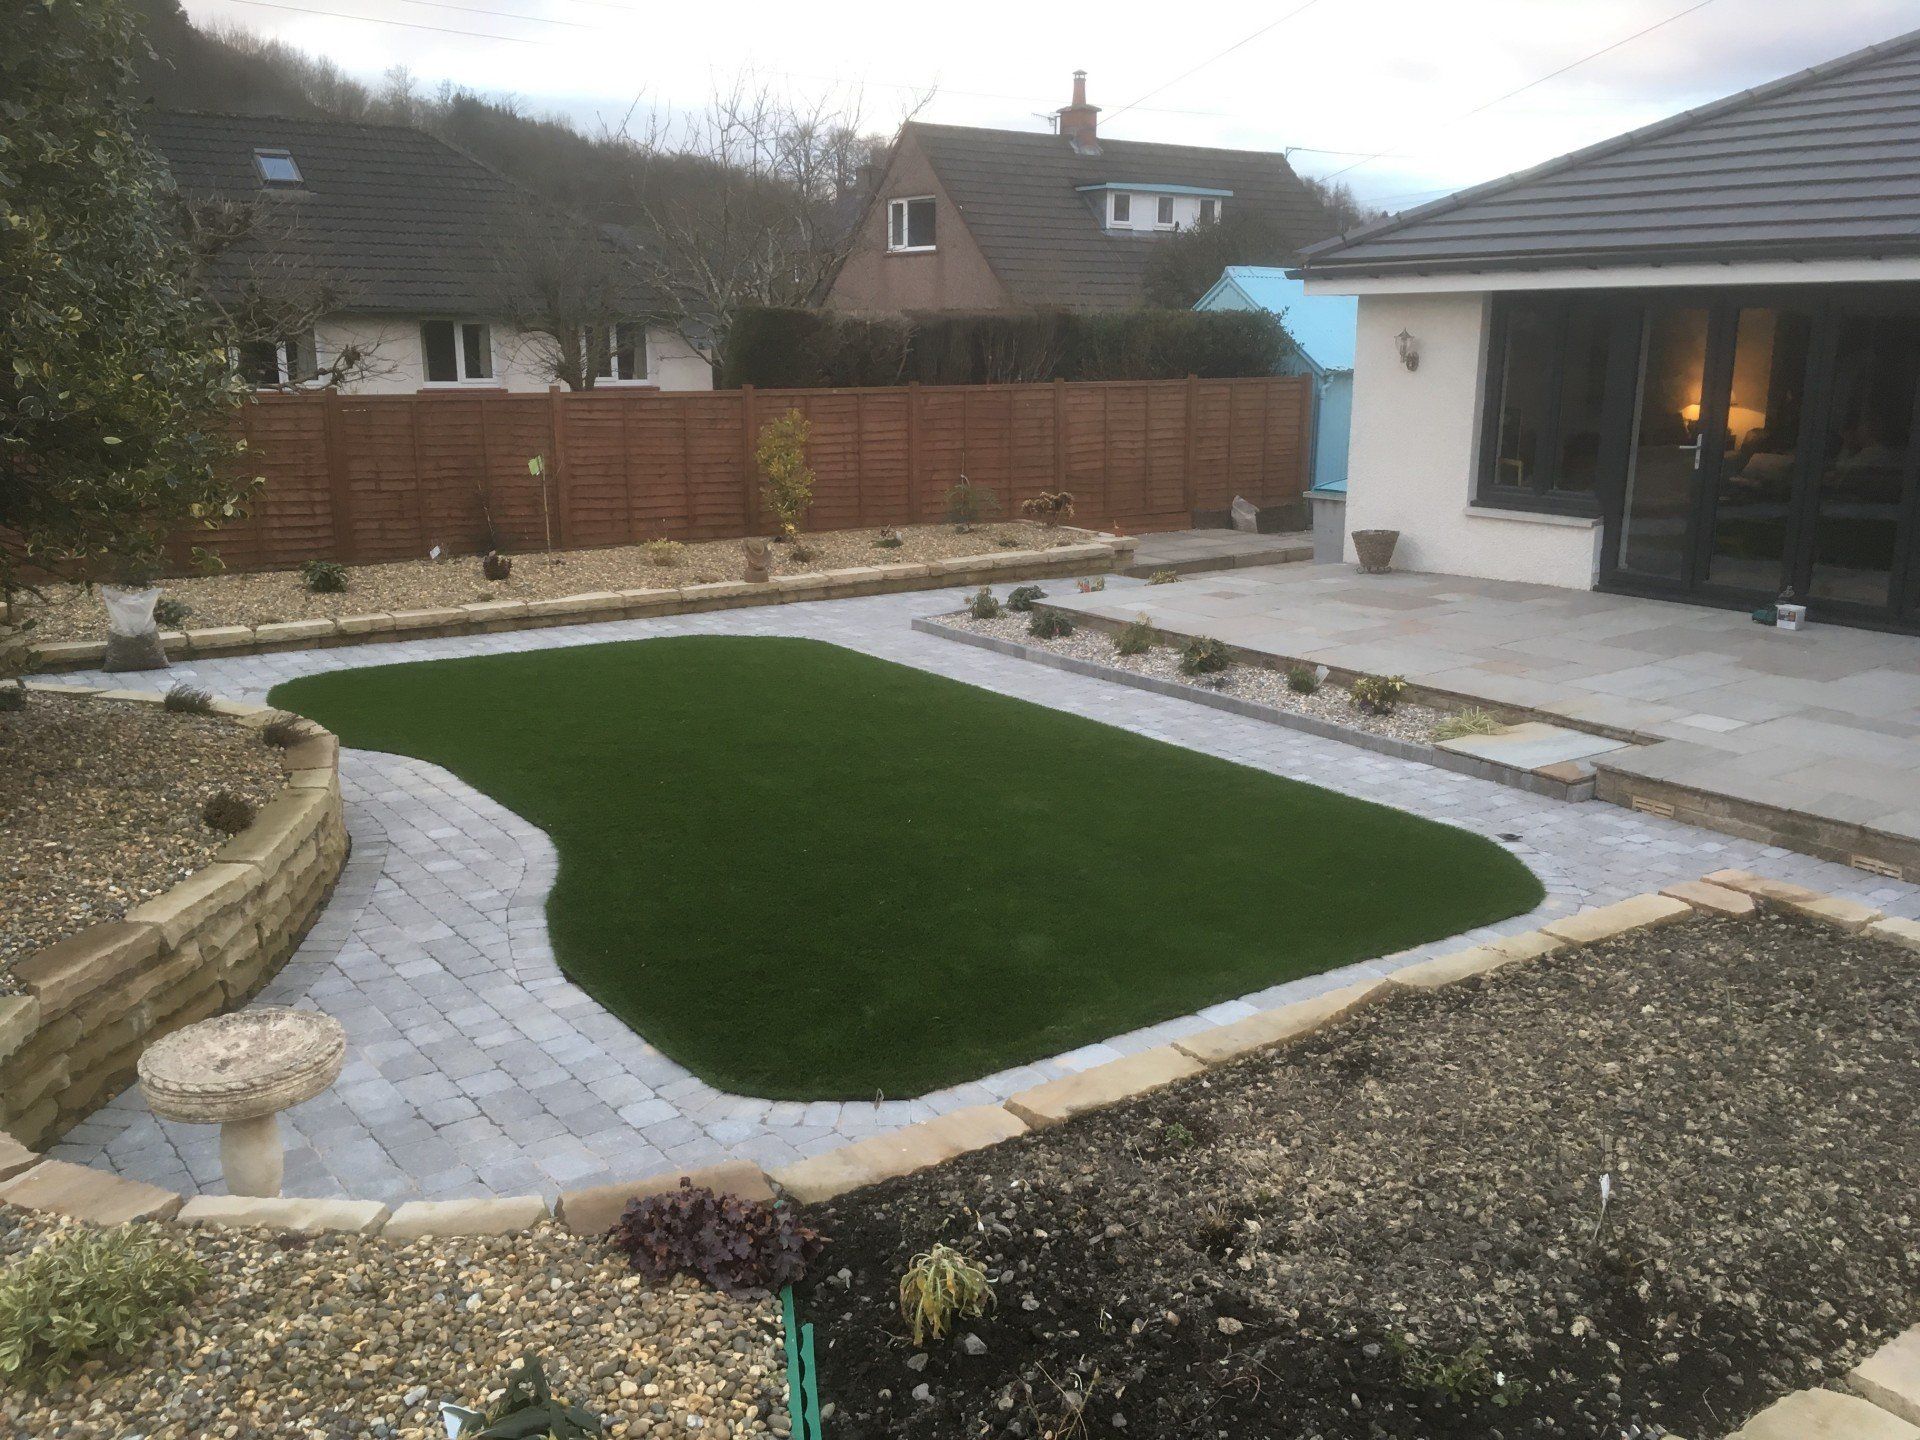 Garden with grassed area, soil and patio